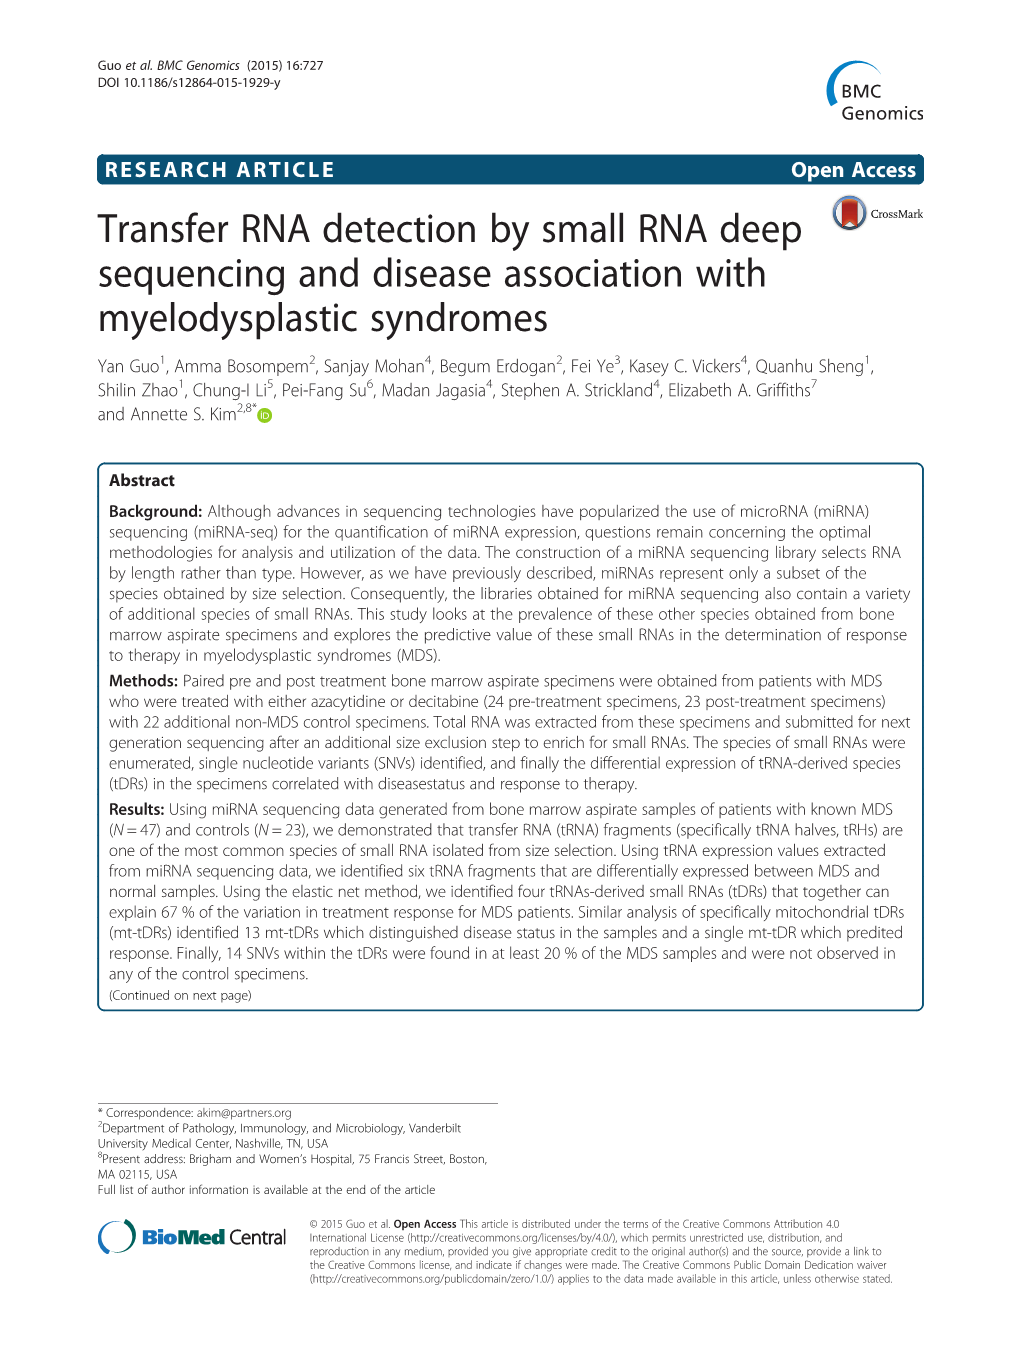 Transfer RNA Detection by Small RNA Deep Sequencing and Disease